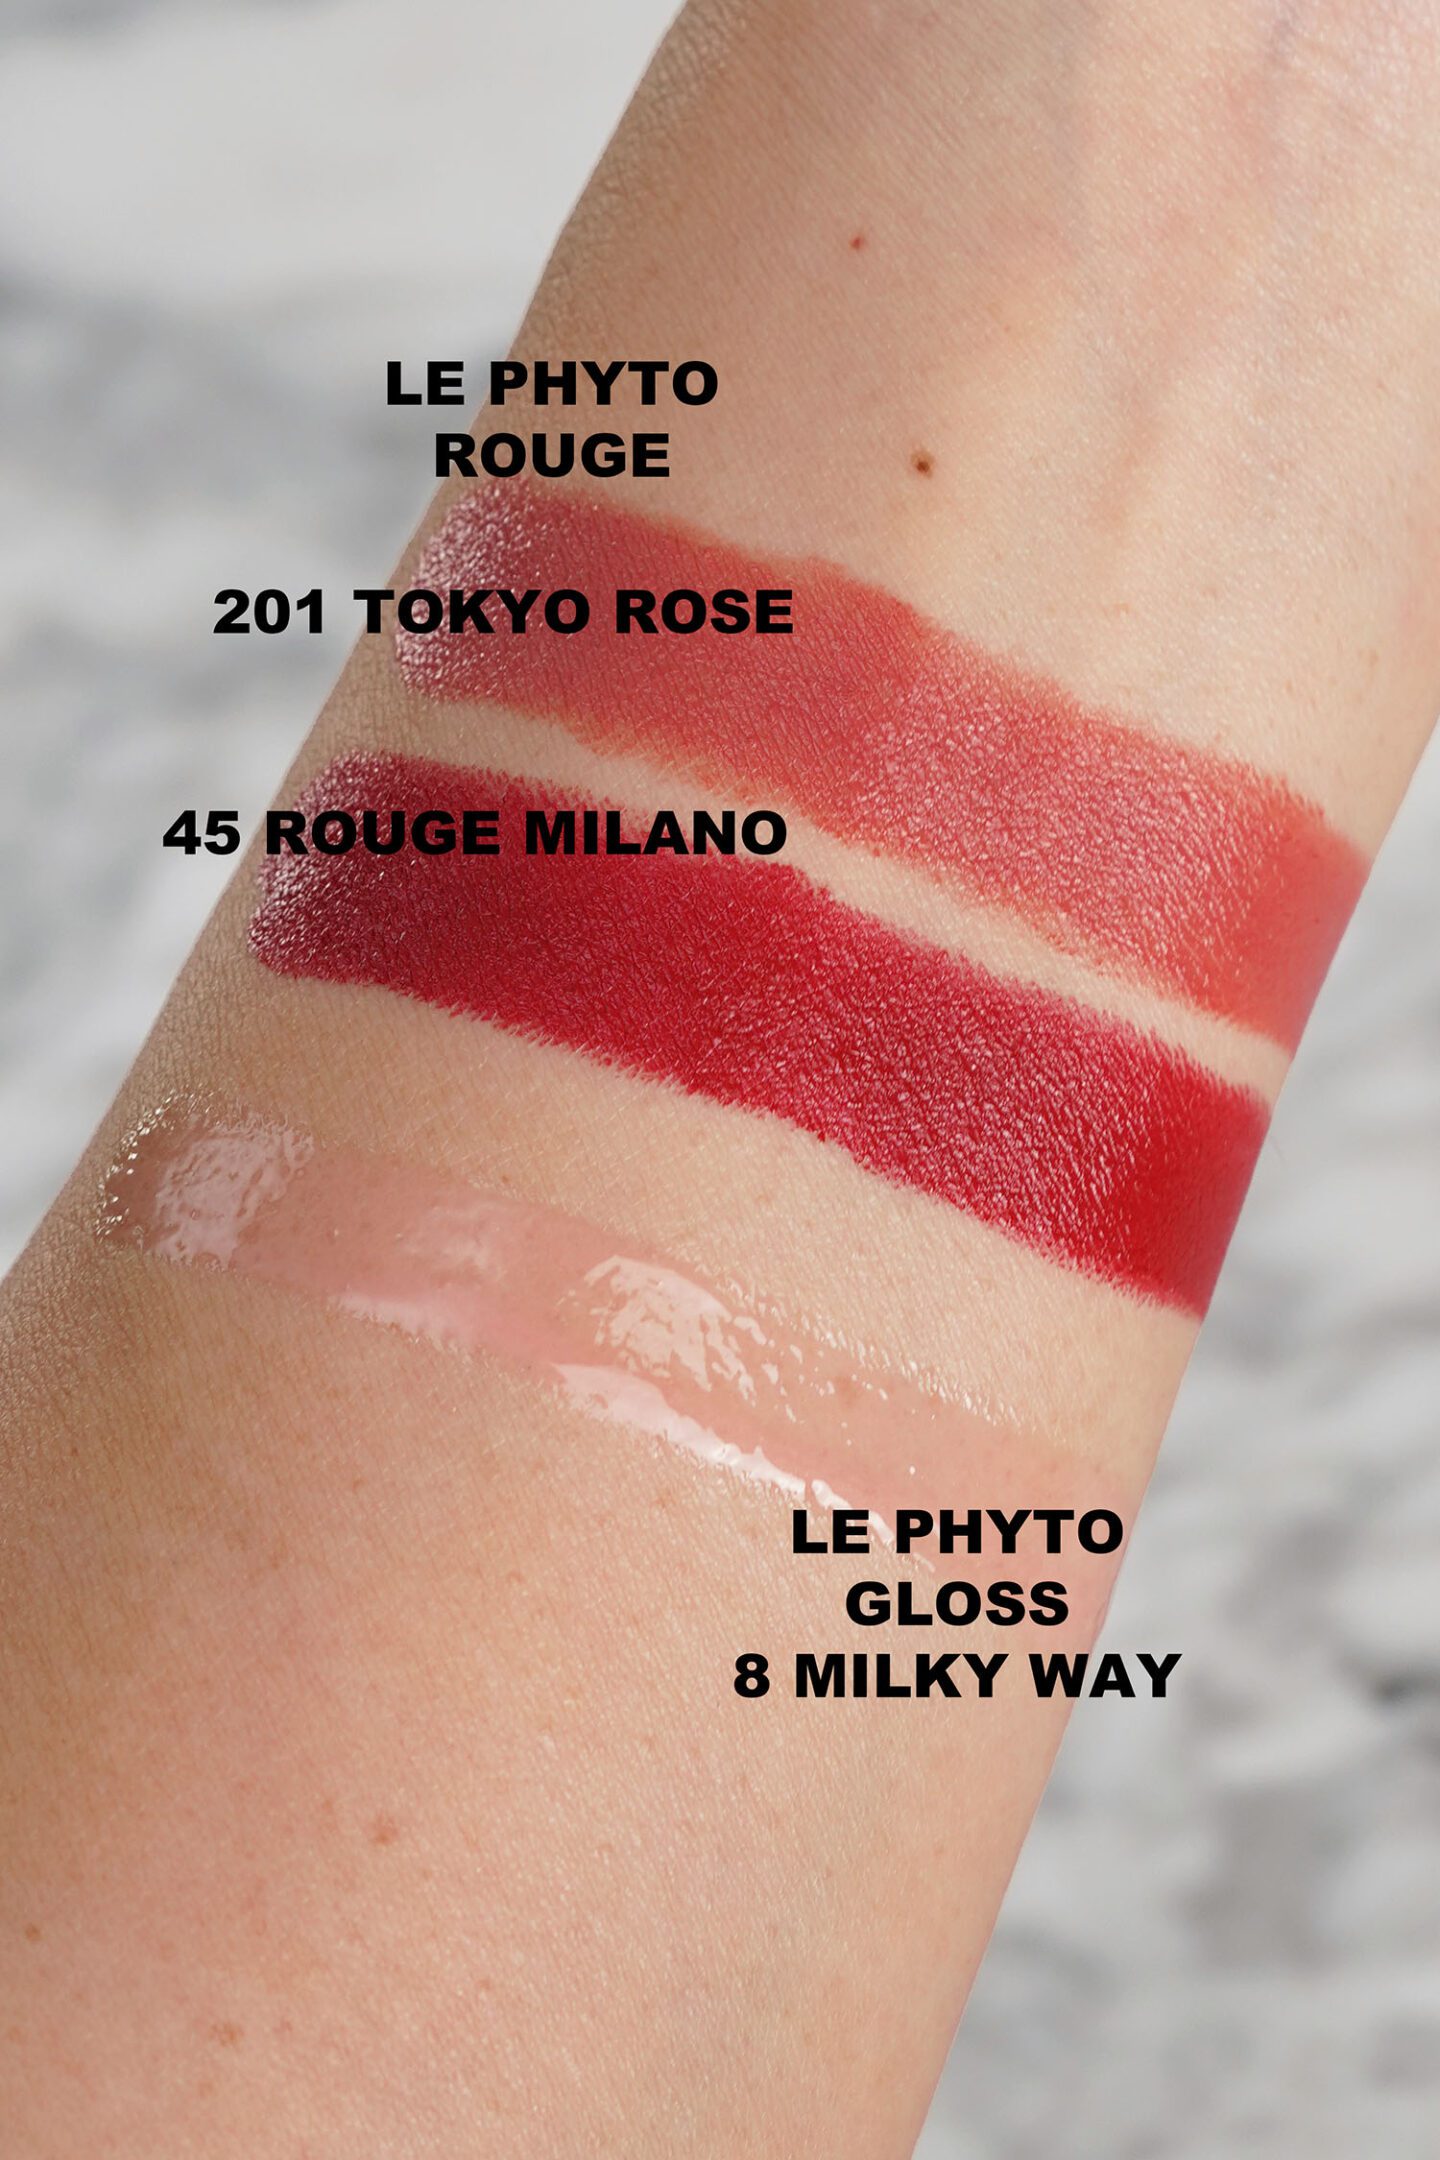 Sisley Le Phyto Rouge 201 Rose Tokyo and 45 Rouge Milano